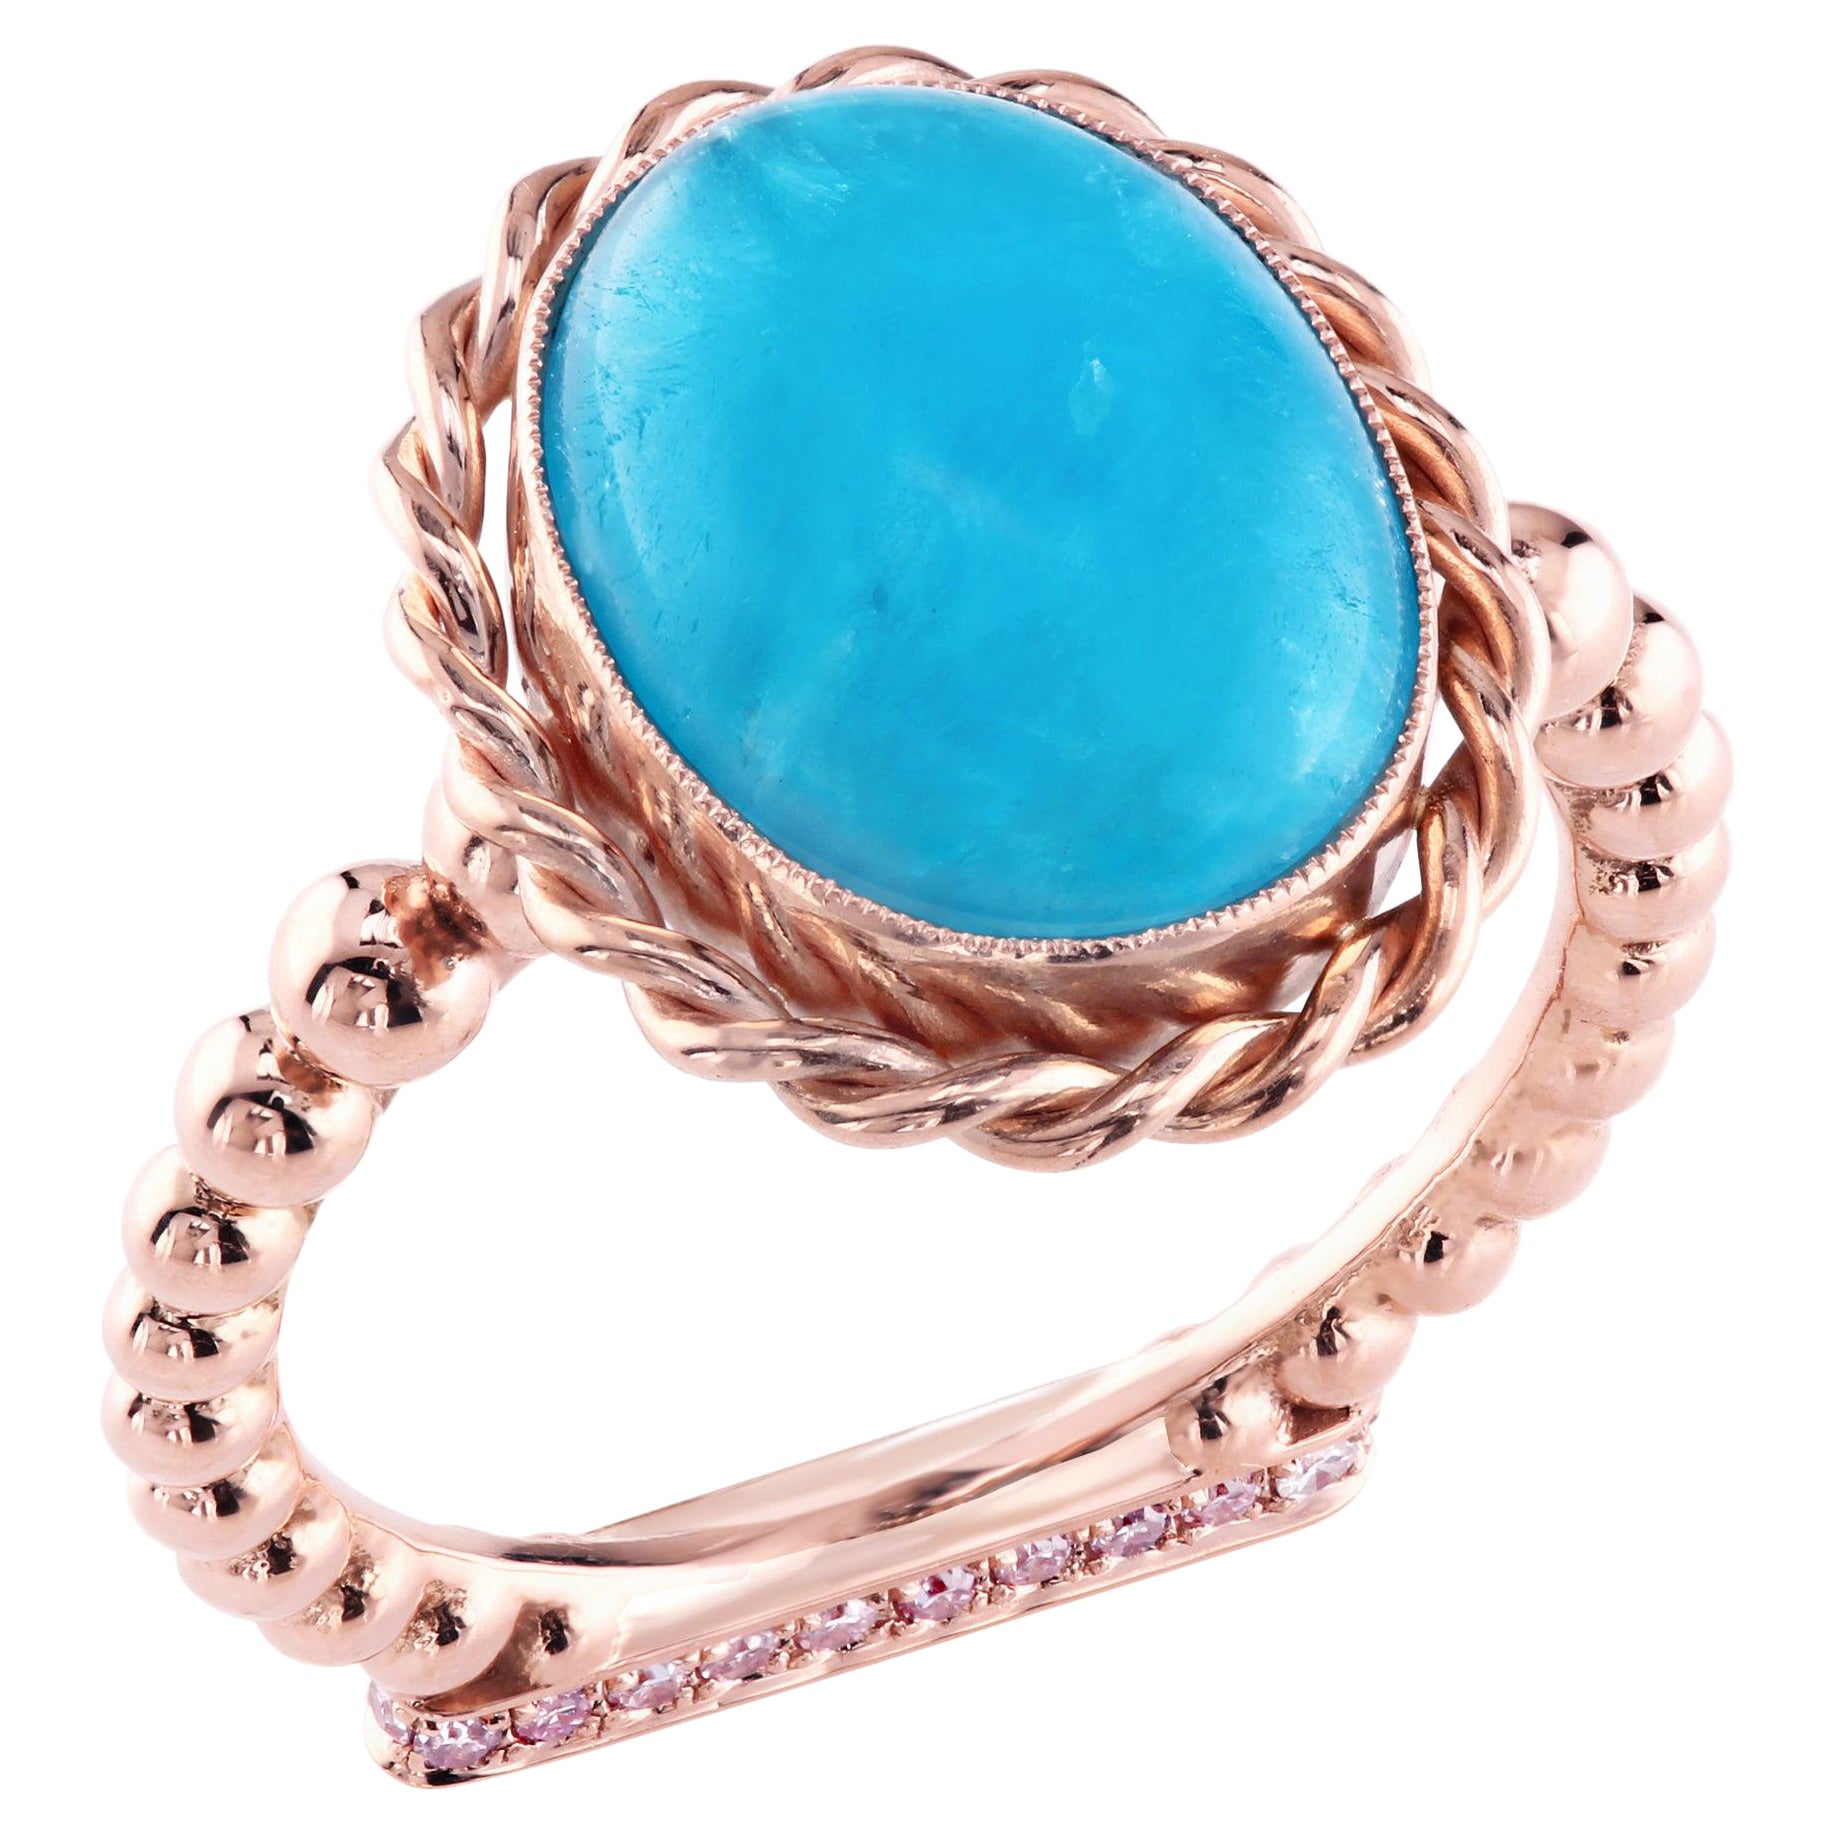 Leon Mege 18K Rose Gold Flamingo Ring with Pink Diamonds and Hemimorphite Cab For Sale